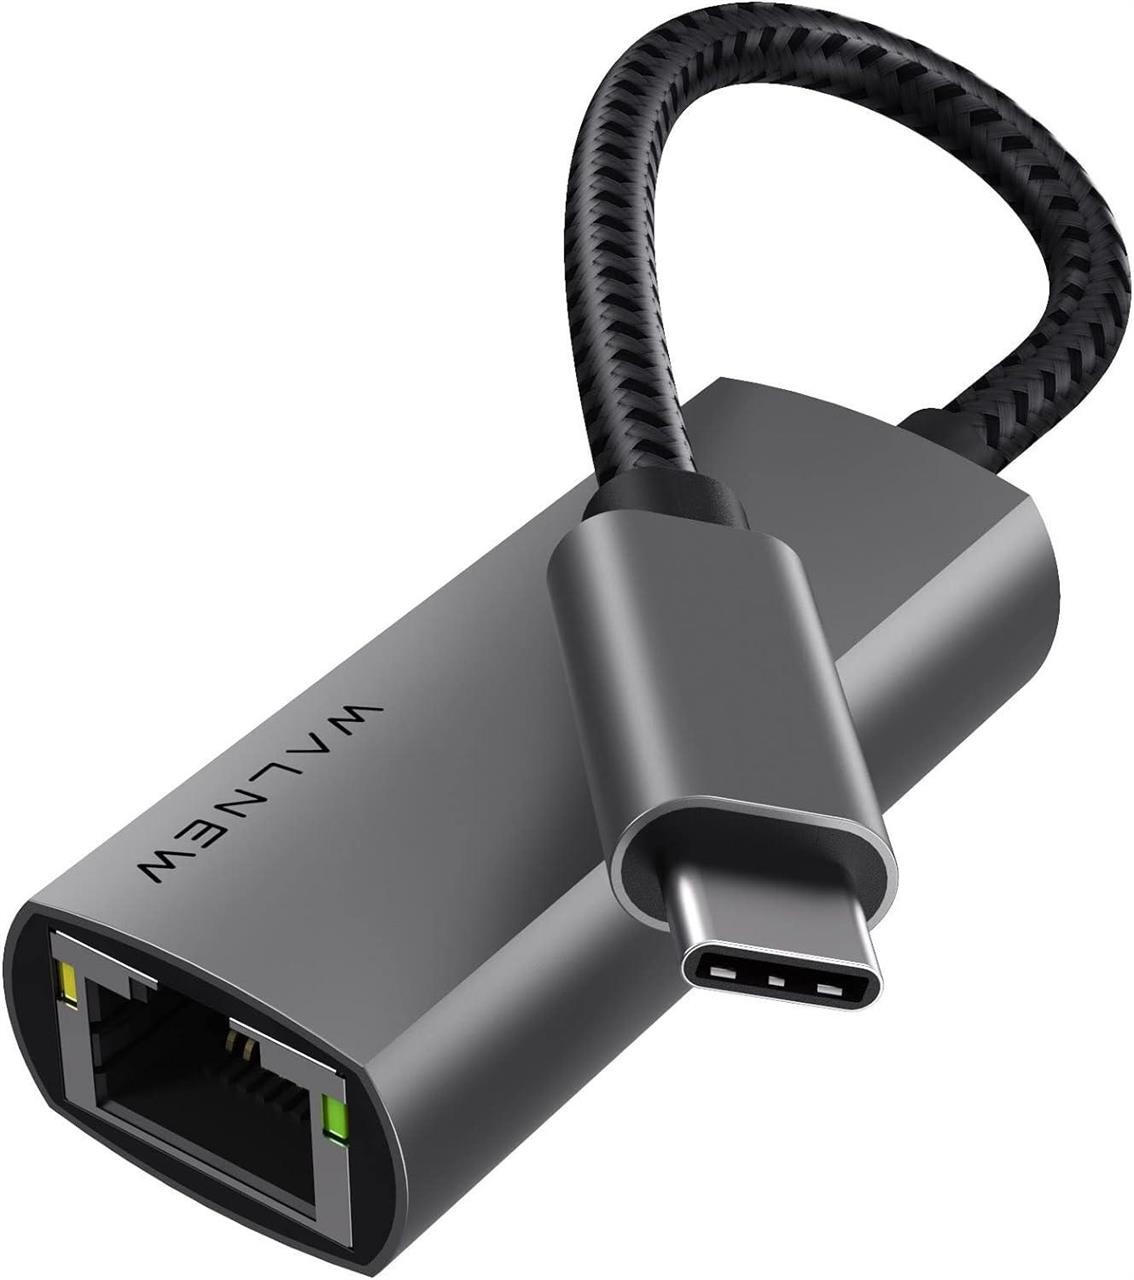 SEALED-USB-C to Ethernet Adapter